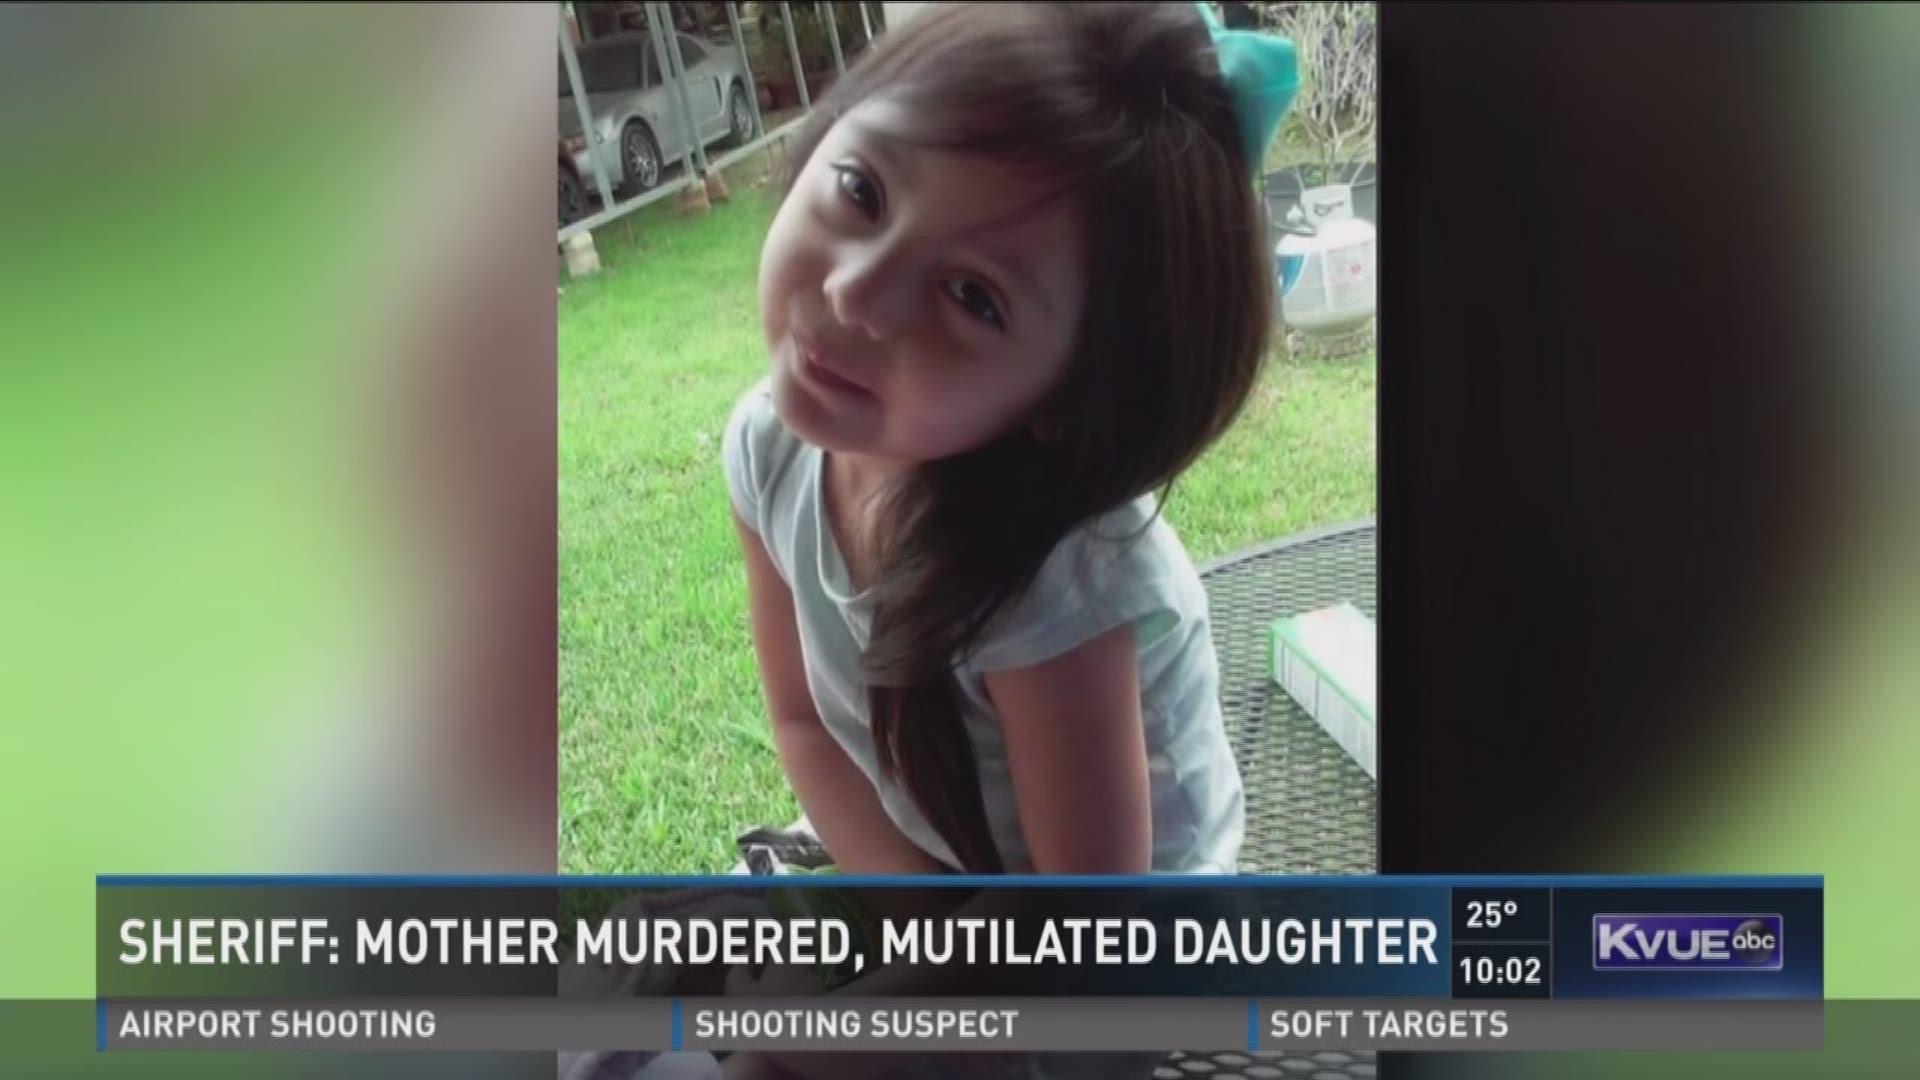 Mother murdered, mutilated daughter